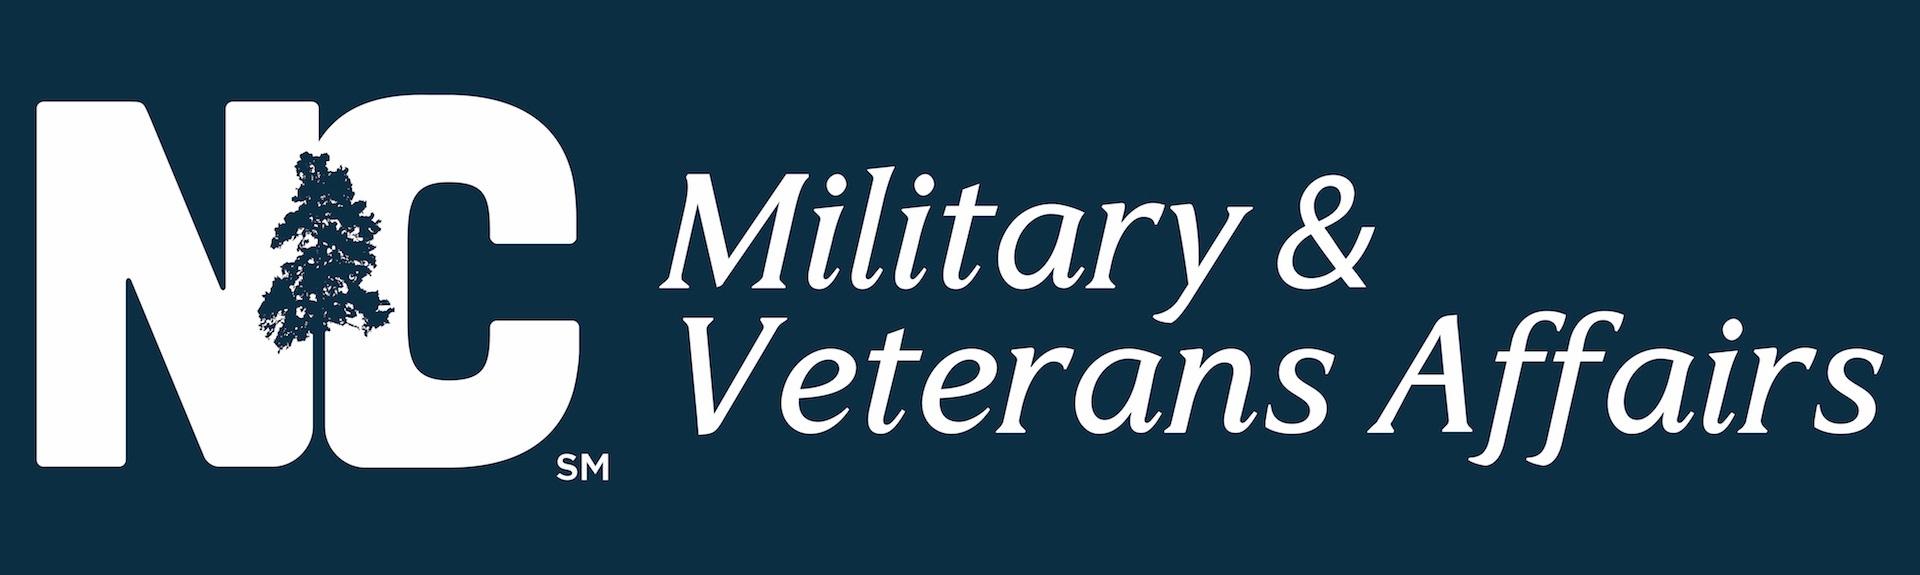 NC Military & Veterans Affairs Logo - Click Here for More Information